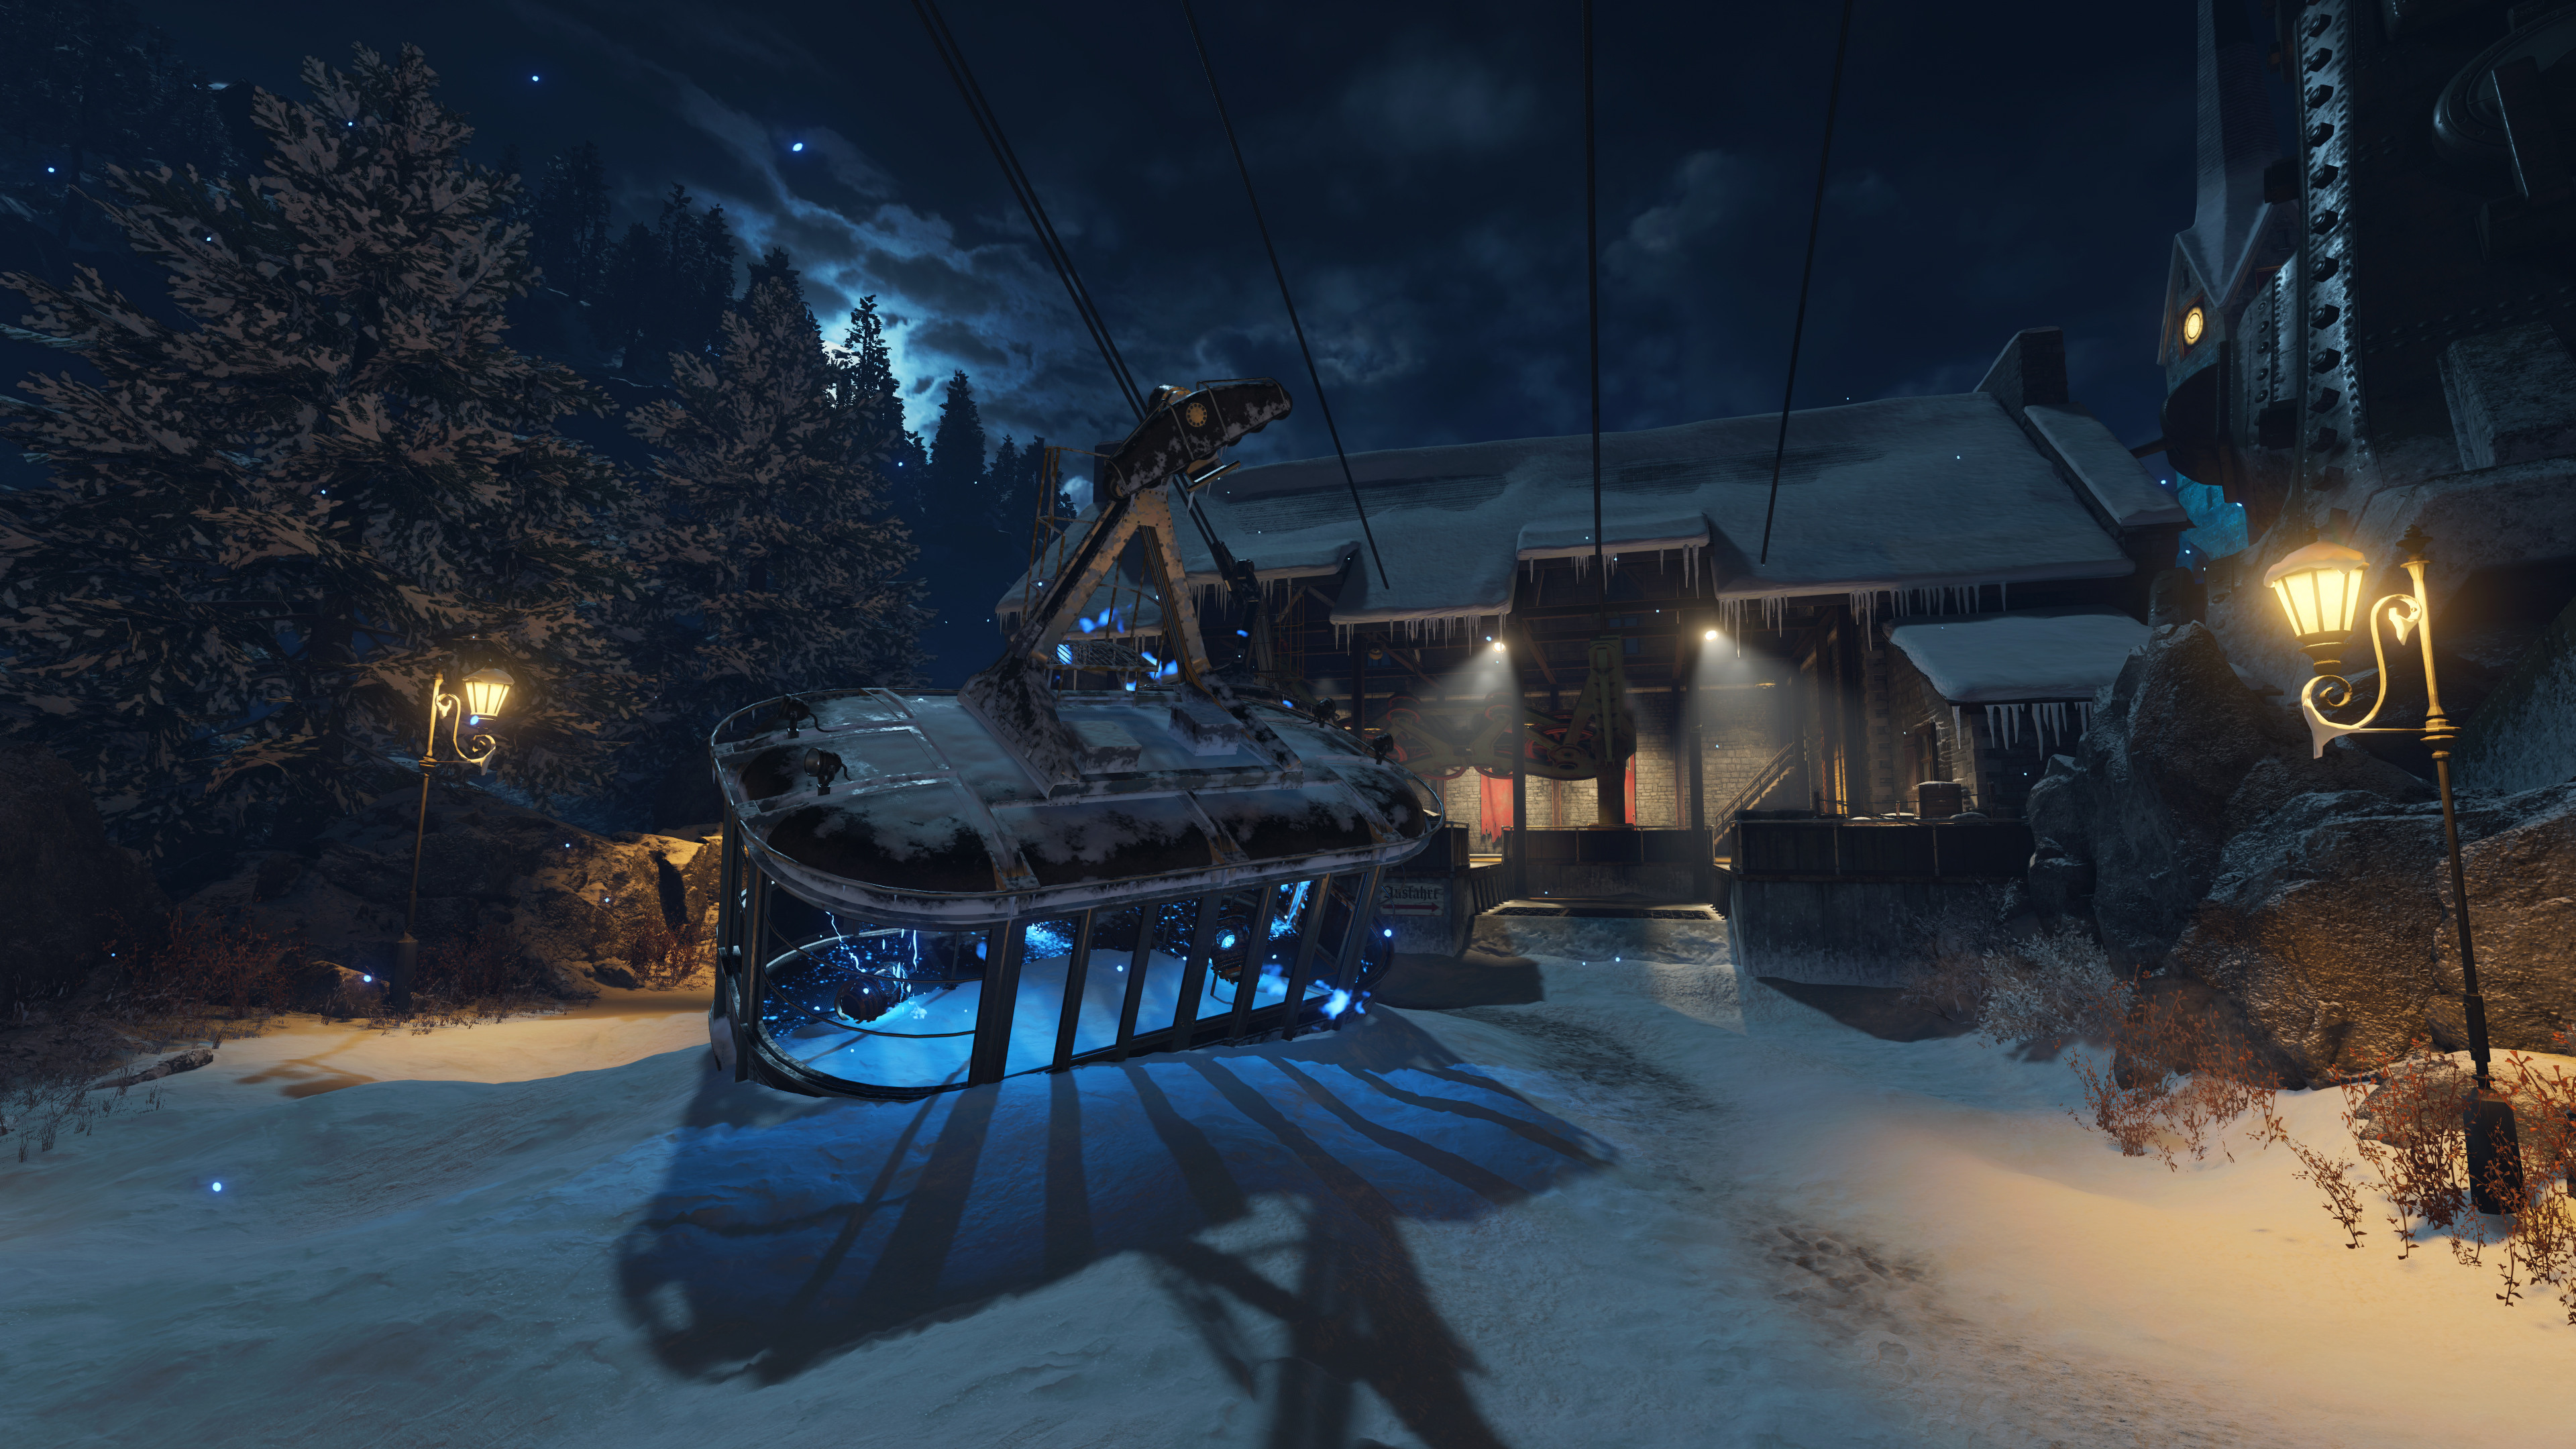 In addition to lighting, the sky tram is an asset I also created for BO3 that is reused here.